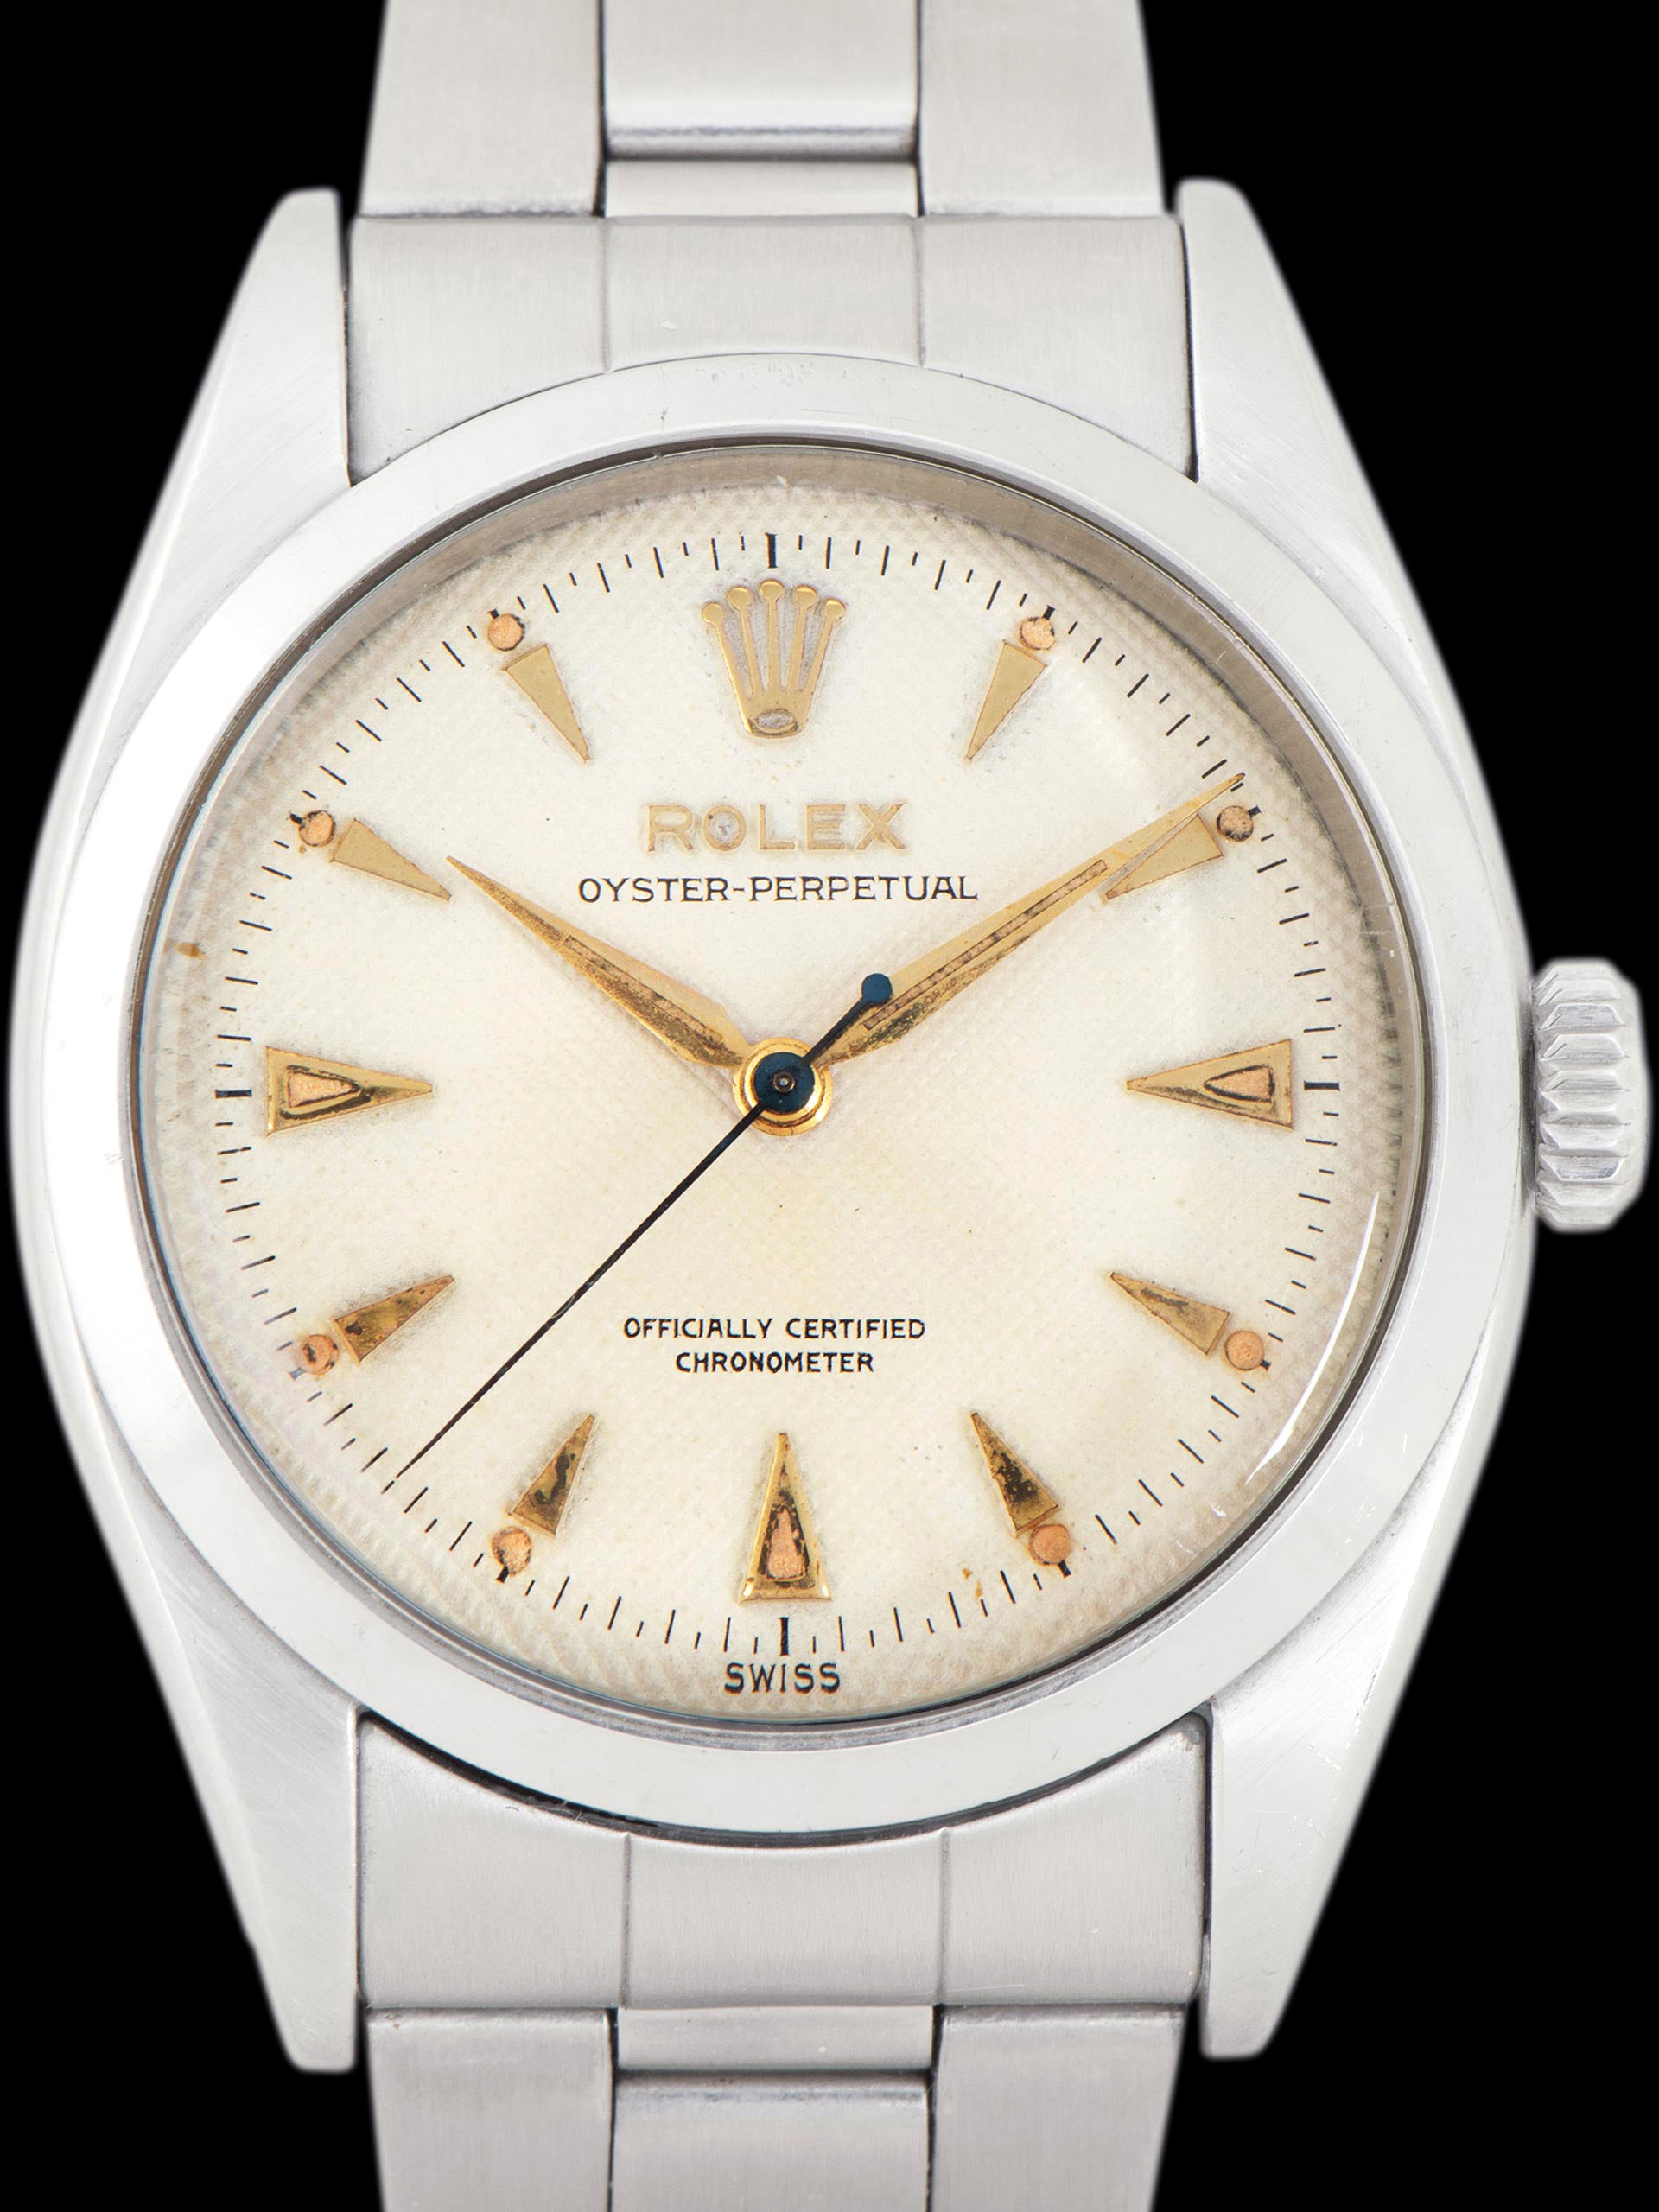 1954 Rolex Oyster-Perpetual (Ref. 6580) White "Honeycomb" Dial